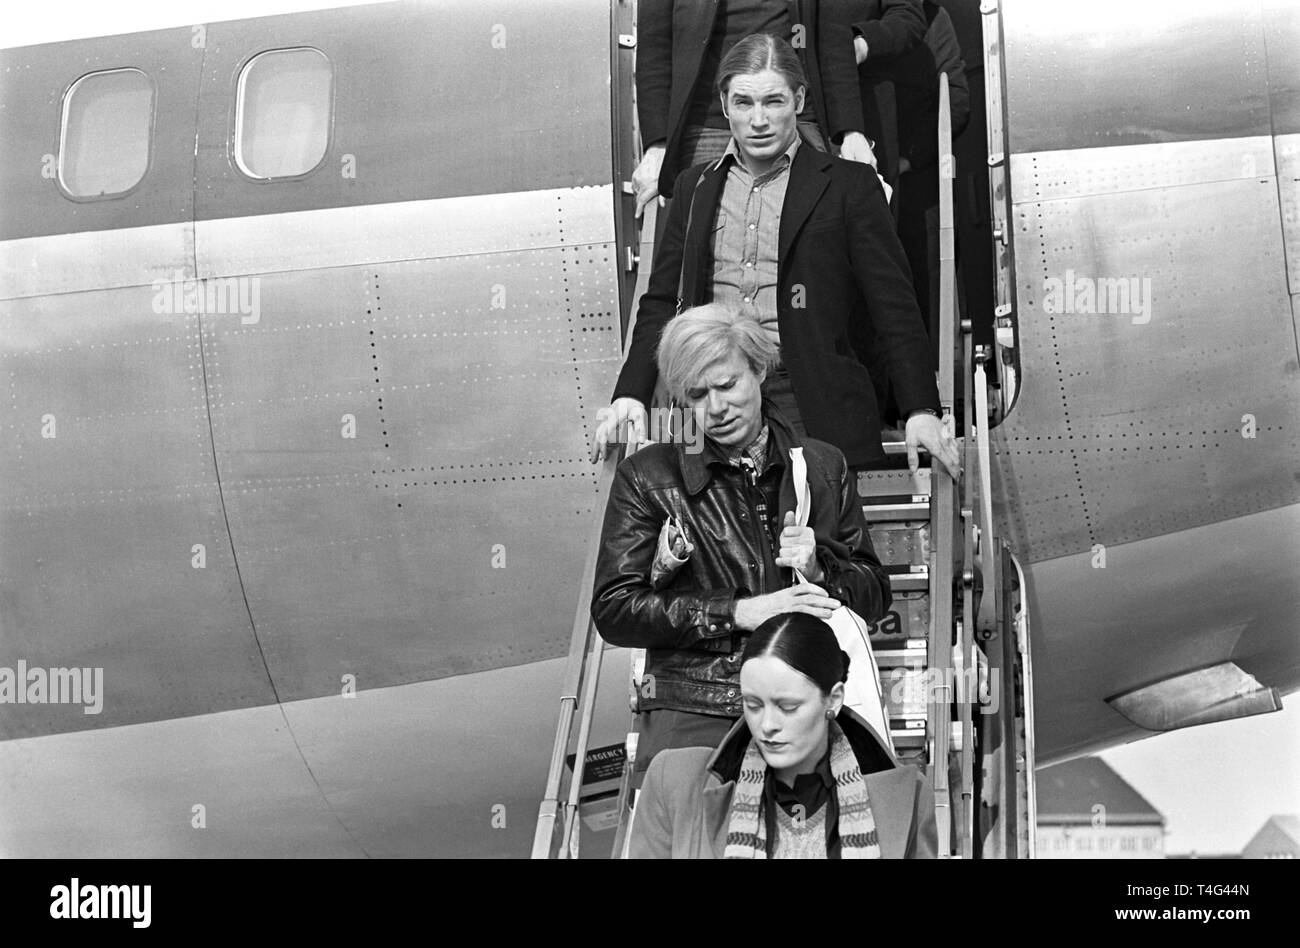 (File) Andy Warhol (middle), Jane Forth and Joe Dallesandro arrive for the premiere of Warhol's latest film 'Trash' in Munich on 17.02.1971. | usage worldwide Stock Photo